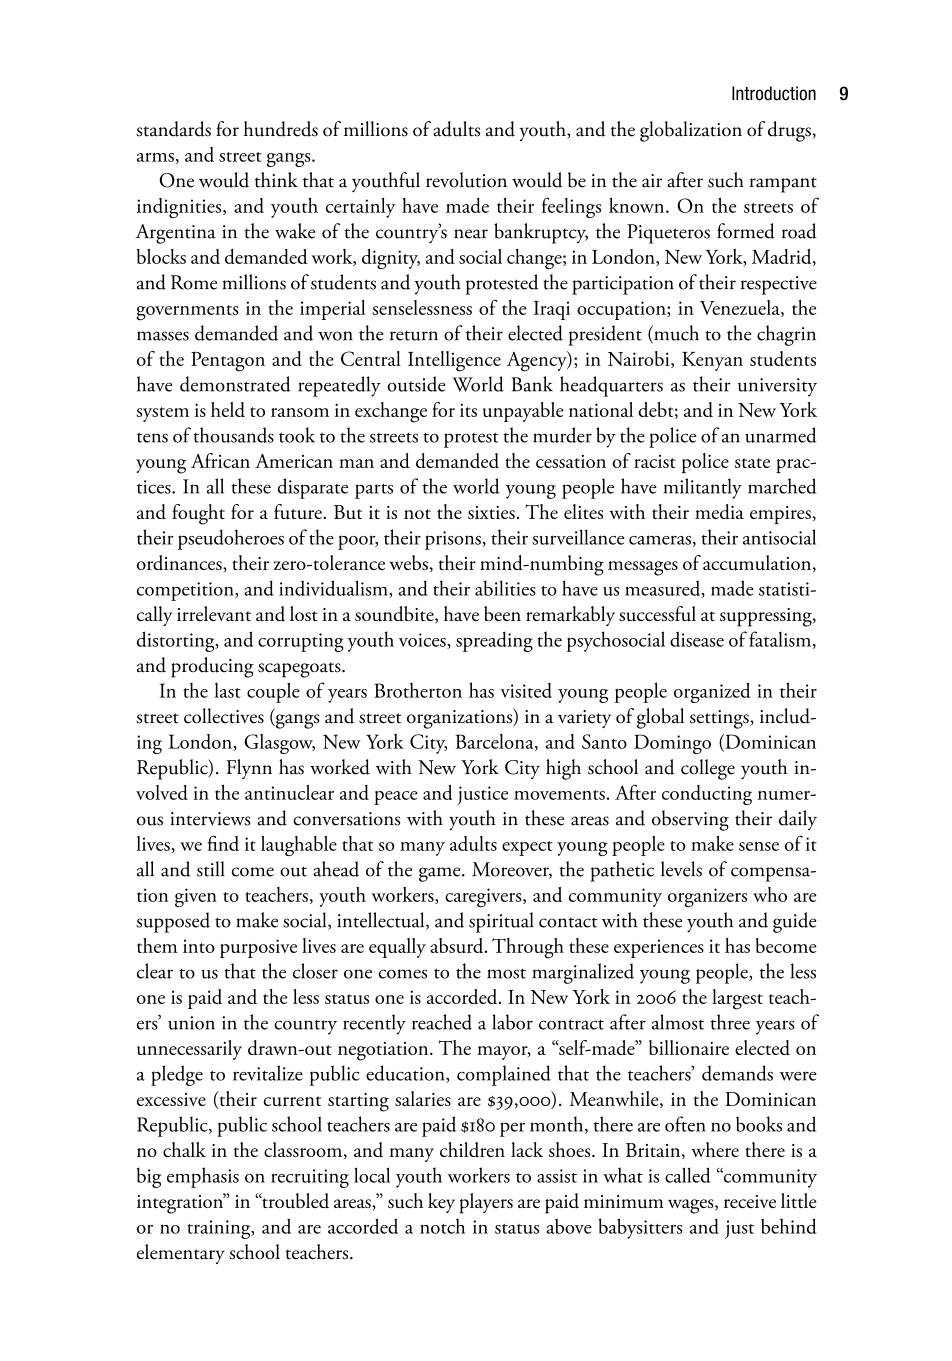 Globalizing the Streets: Cross-Cultural Perspectives on Youth, Social Control, and Empowerment page 9